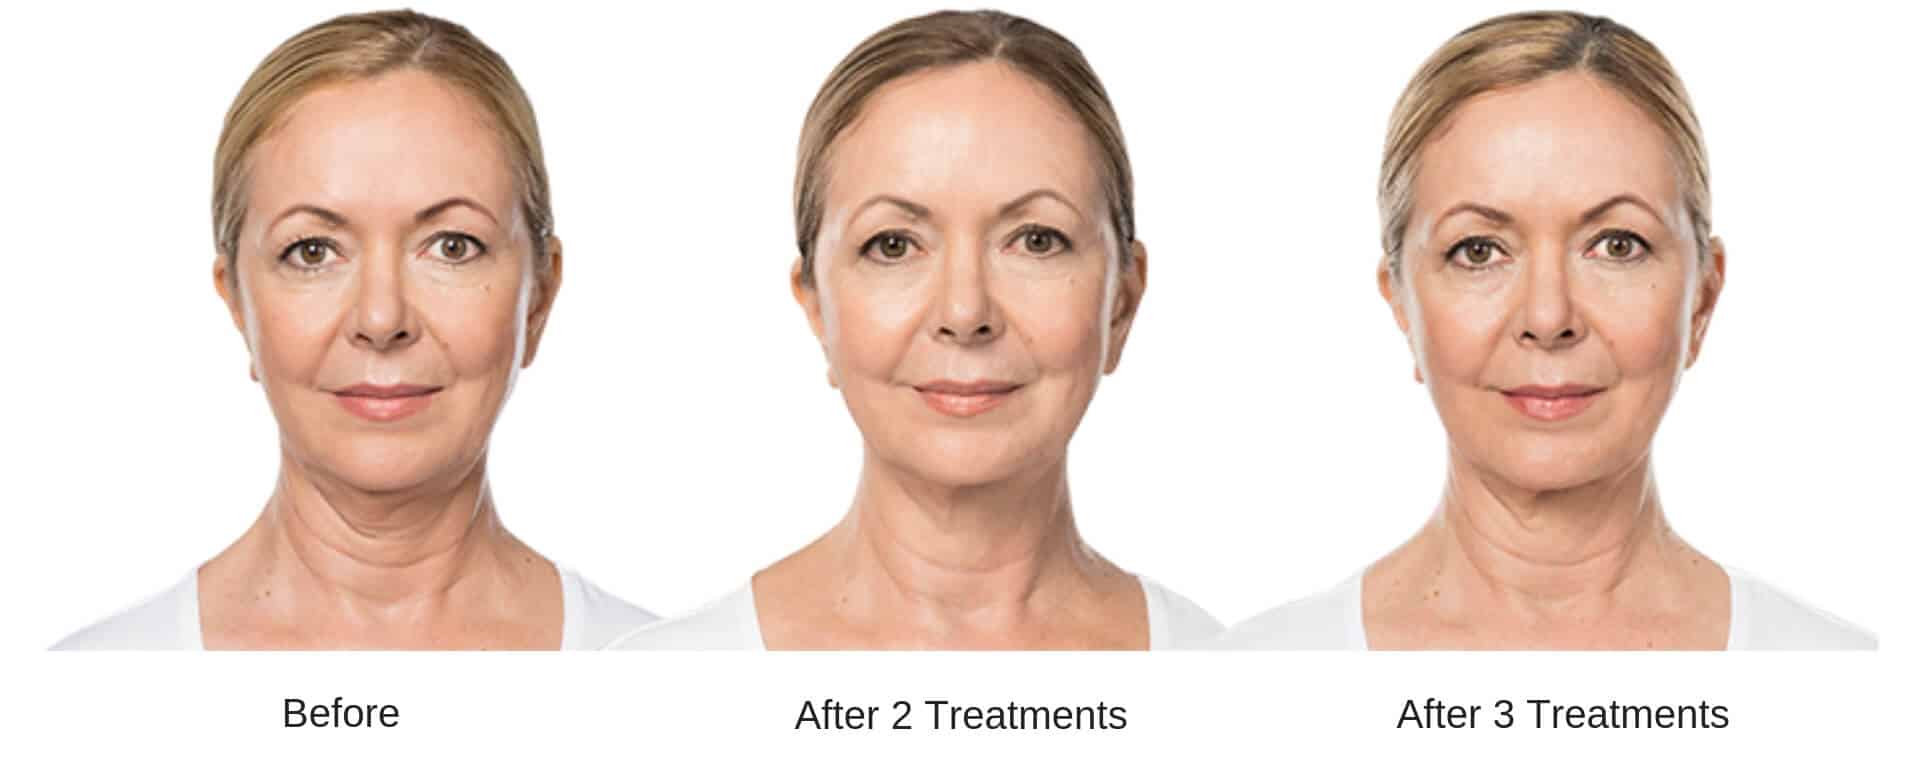 Woman's before and after results from kybella.